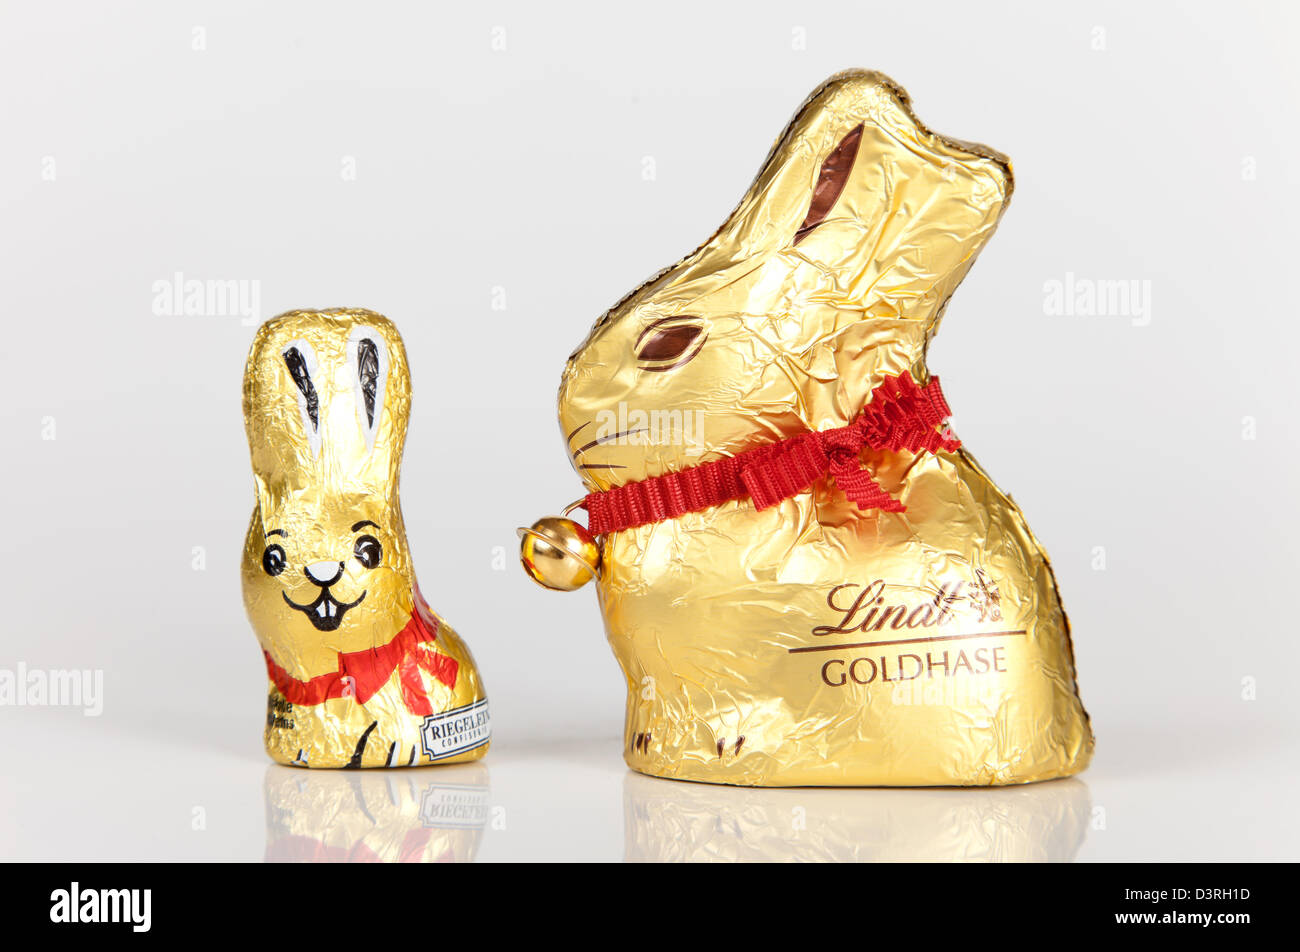 Berlin, Germany, the company Riegelein golden Easter Confectionery and Lindt and Spruengli Stock Photo